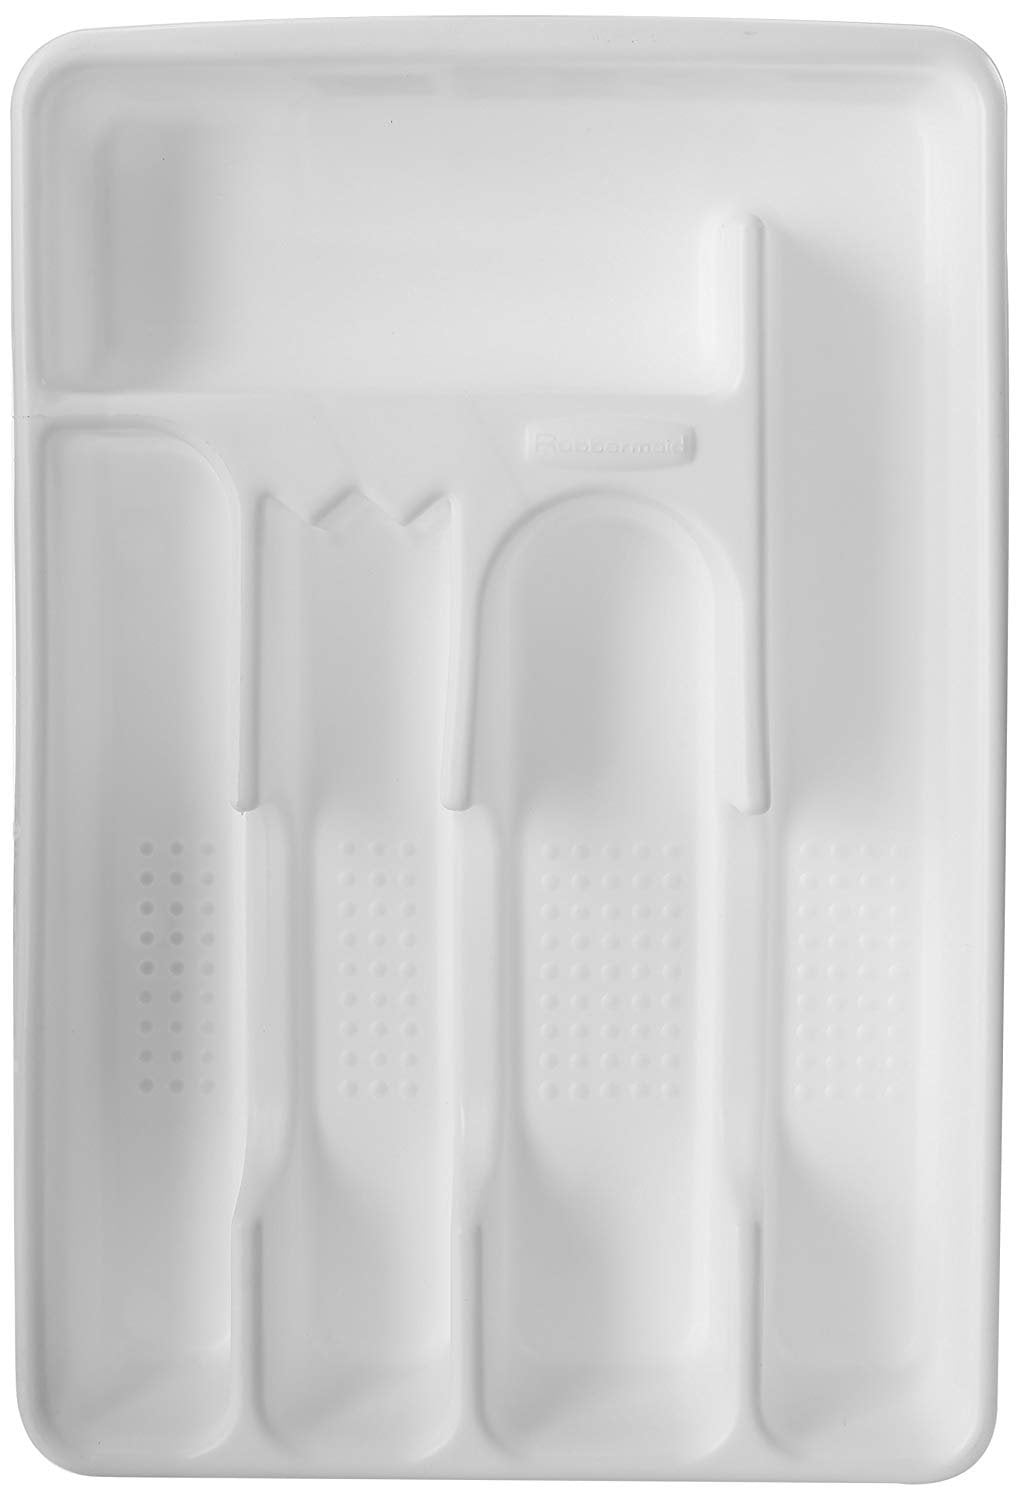 Rubbermaid 3 In. x 12 In. x 2 In. White Drawer Organizer Tray FG2912RDWHT,  1 - Foods Co.